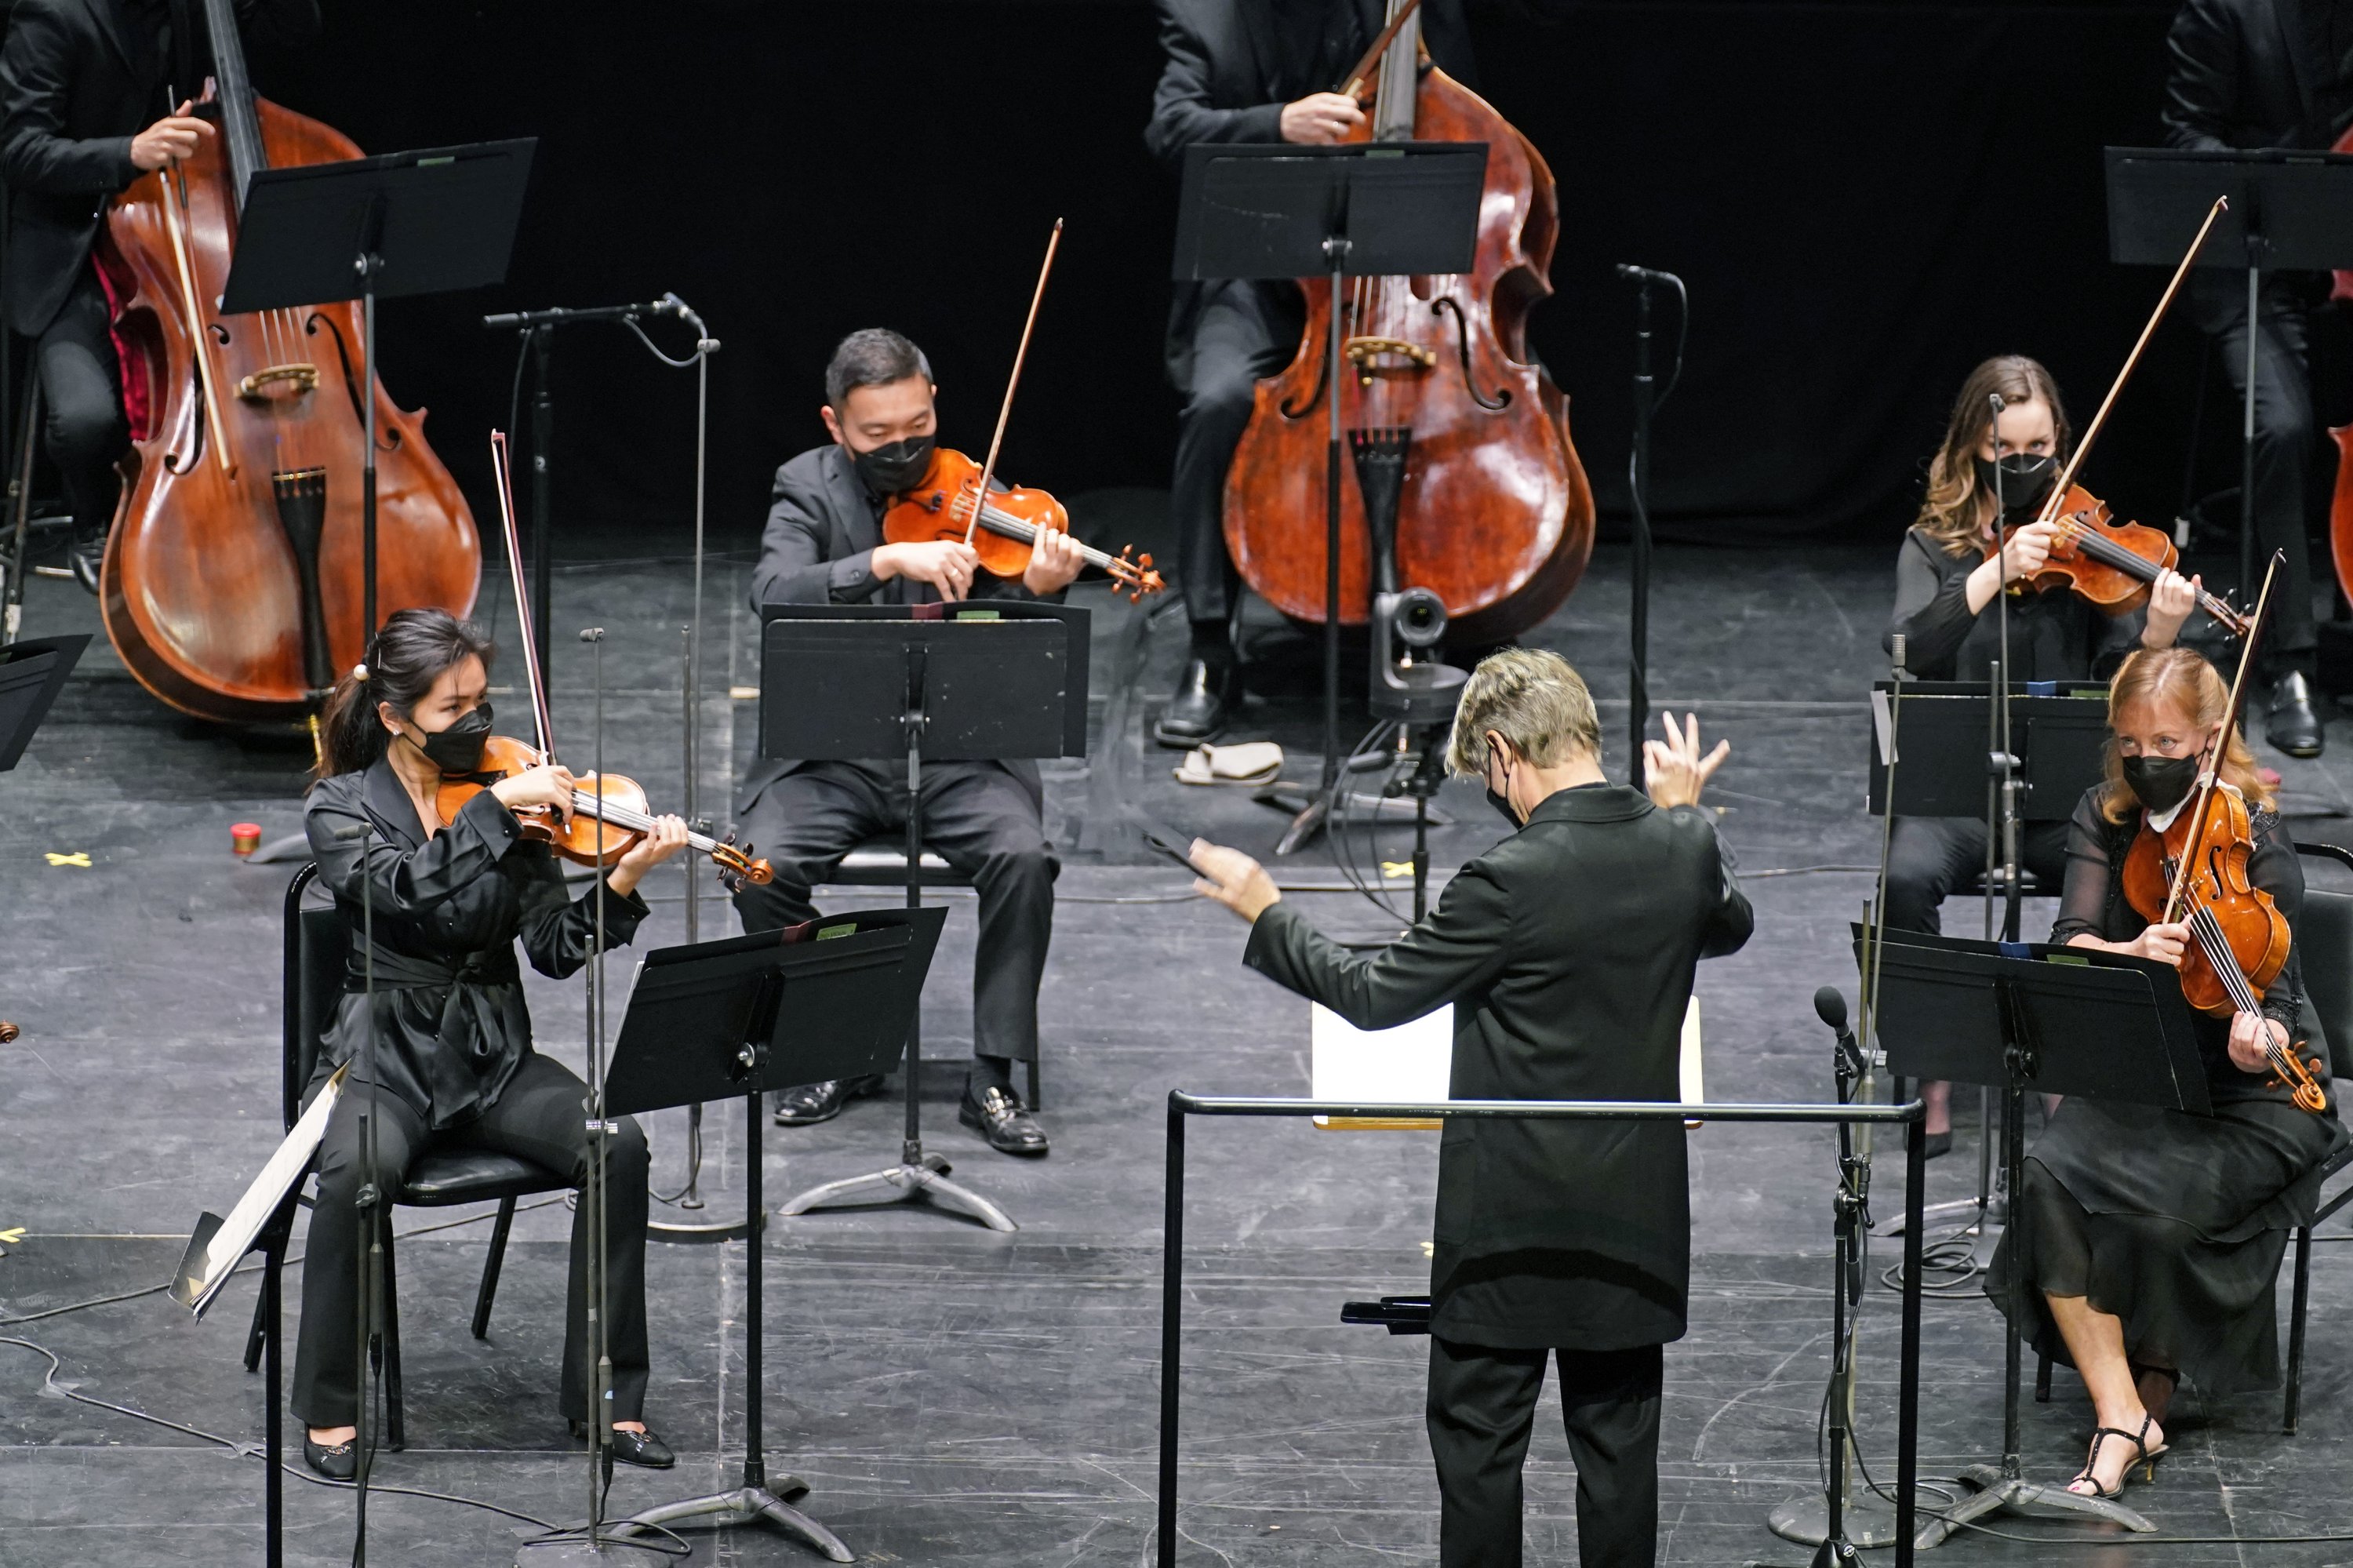 Essa-Pekka Salonen leads members of the New York Philharmonic as a guest conductor before an audience of 150 concertgoers at The Shed in Hudson Yards, New York, U.S., Wednesday, April 14, 2021. (AP Photo)